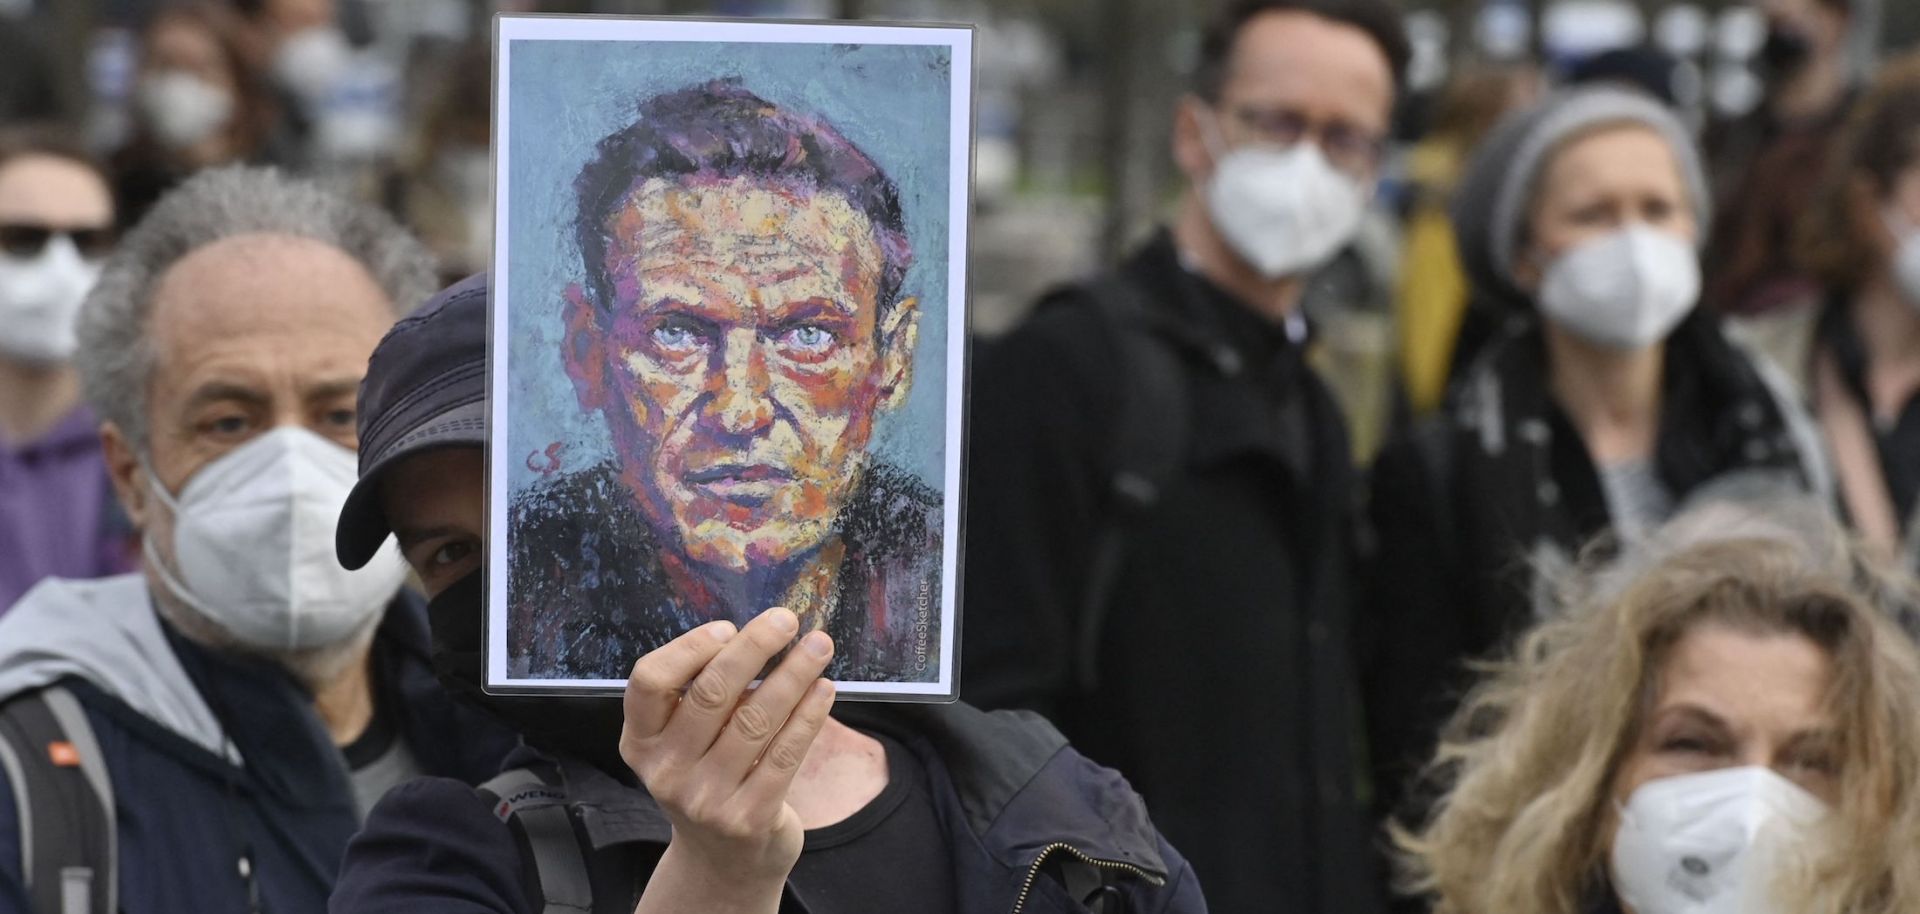 A demonstrator displays a portrait of Russian opposition leader Alexei Navalny during a protest in Berlin, Germany, on April 21, 2021.